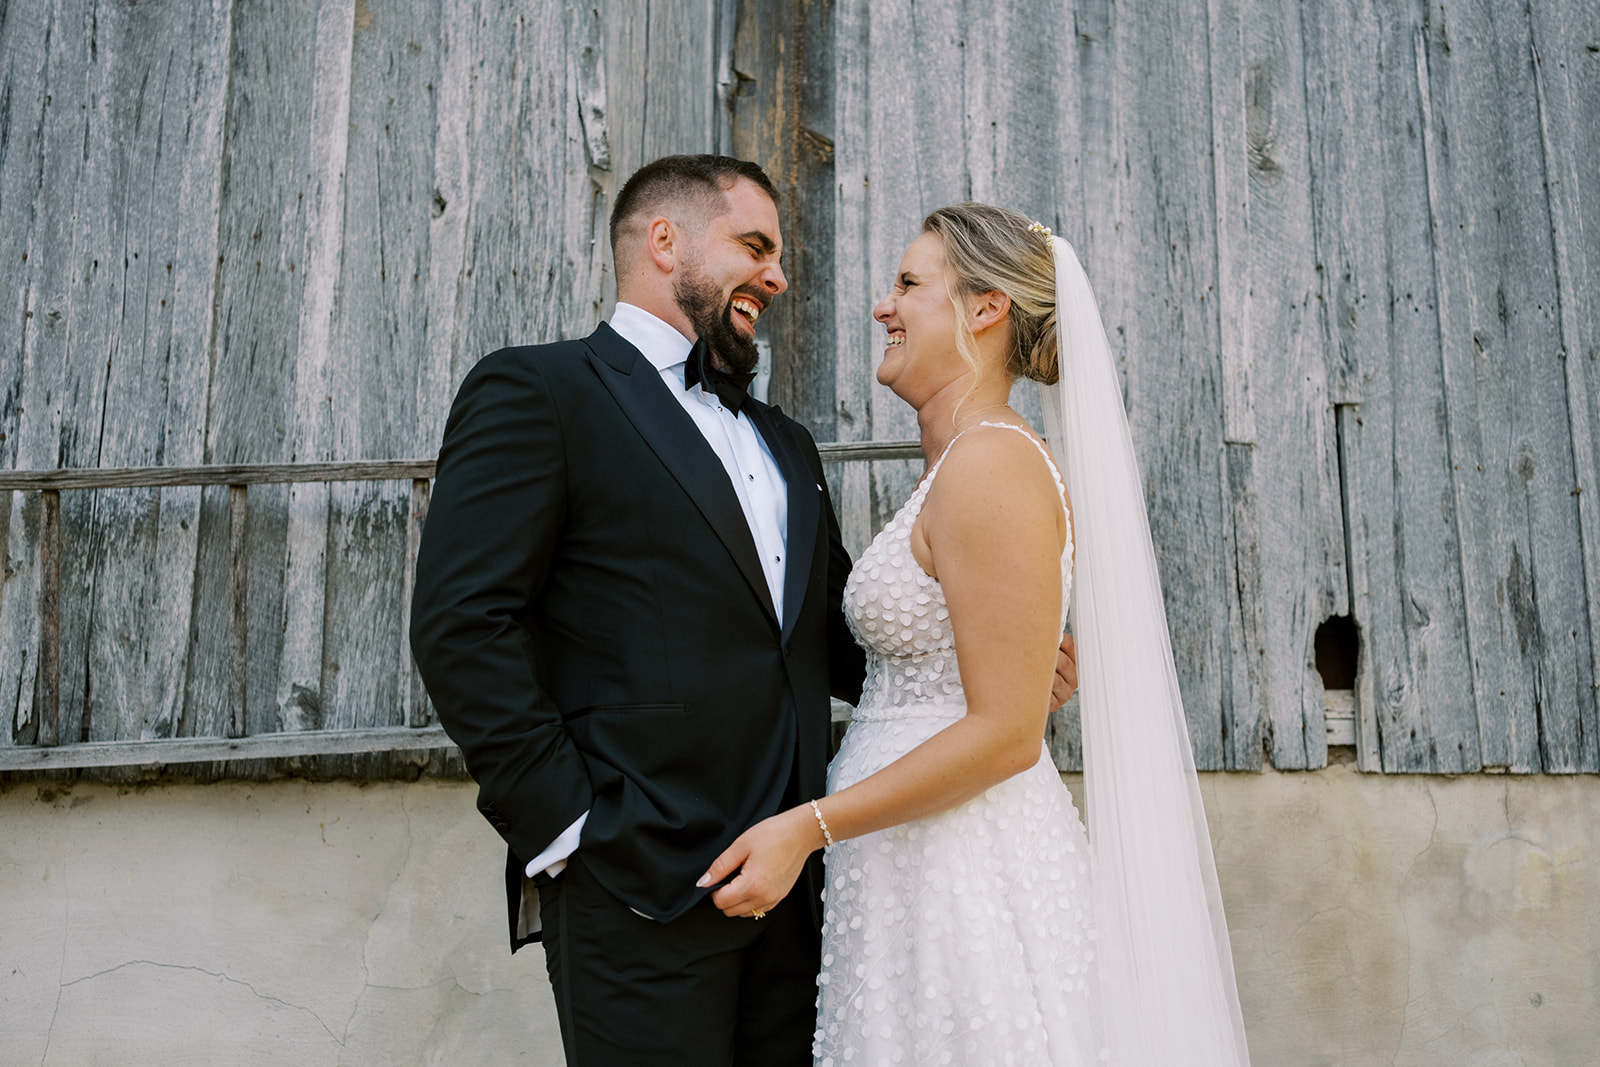 Bride and groom laugh together in front of an old barn at Virginia wedding